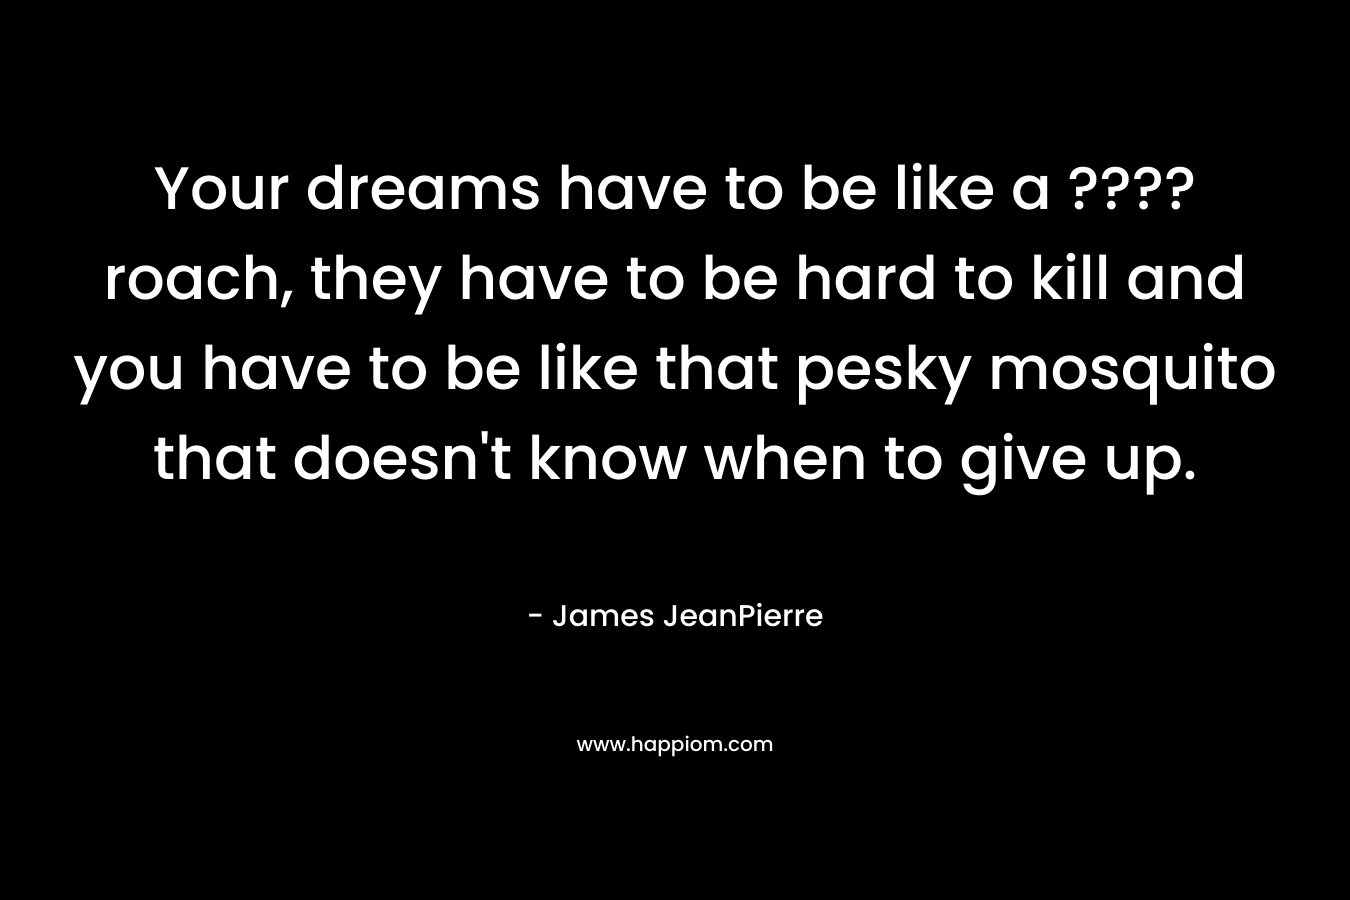 Your dreams have to be like a ????roach, they have to be hard to kill and you have to be like that pesky mosquito that doesn’t know when to give up. – James JeanPierre